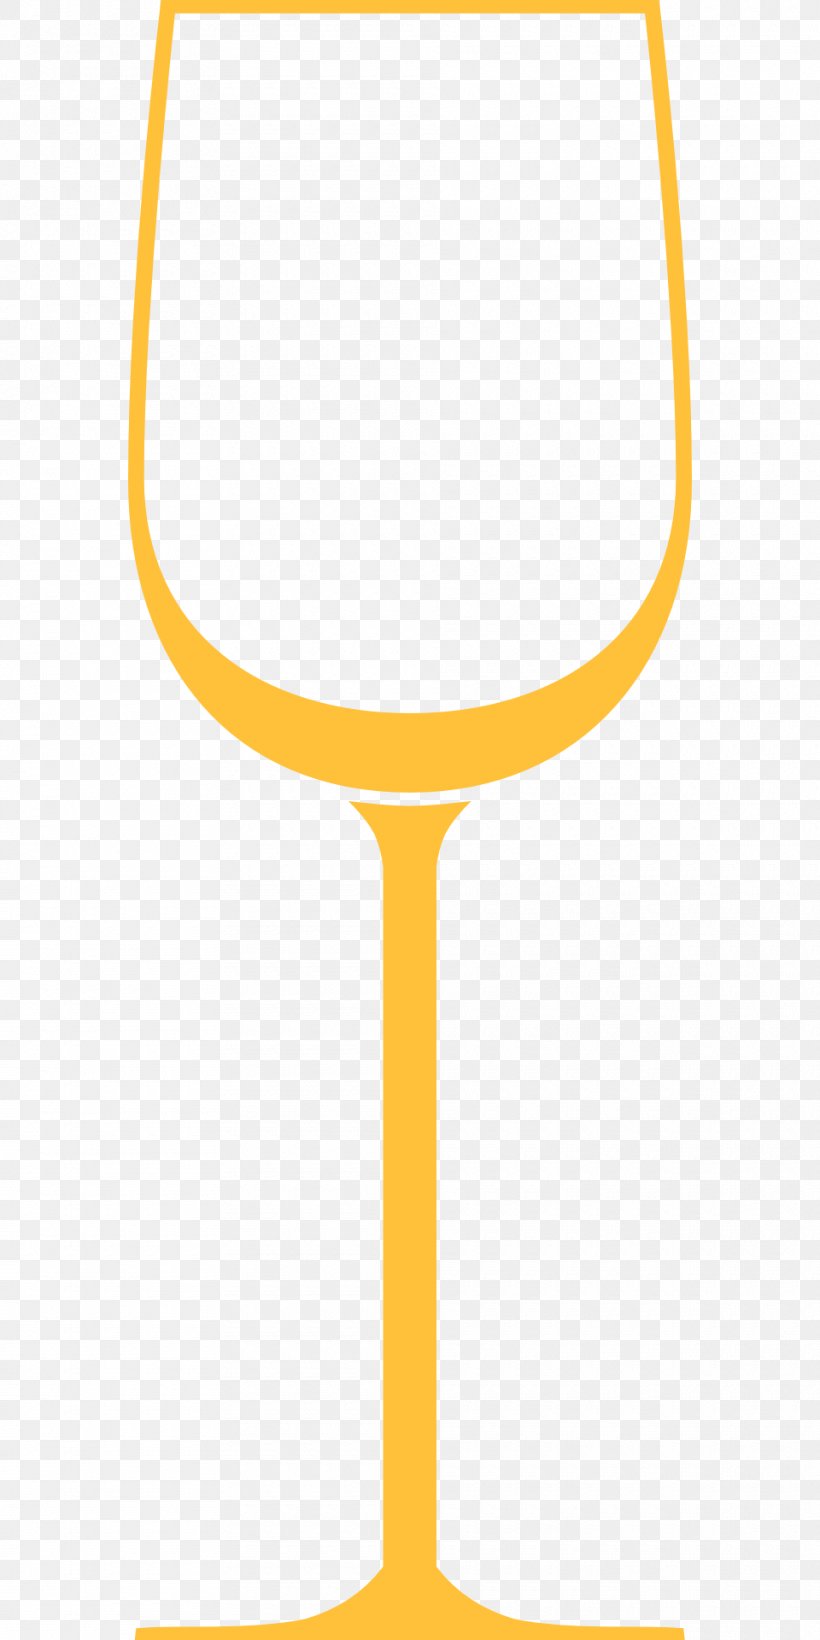 Cocktail Wine Glass Champagne Glass Clip Art, PNG, 960x1920px, Cocktail, Alcoholic Drink, Beer Glasses, Bottle, Champagne Glass Download Free